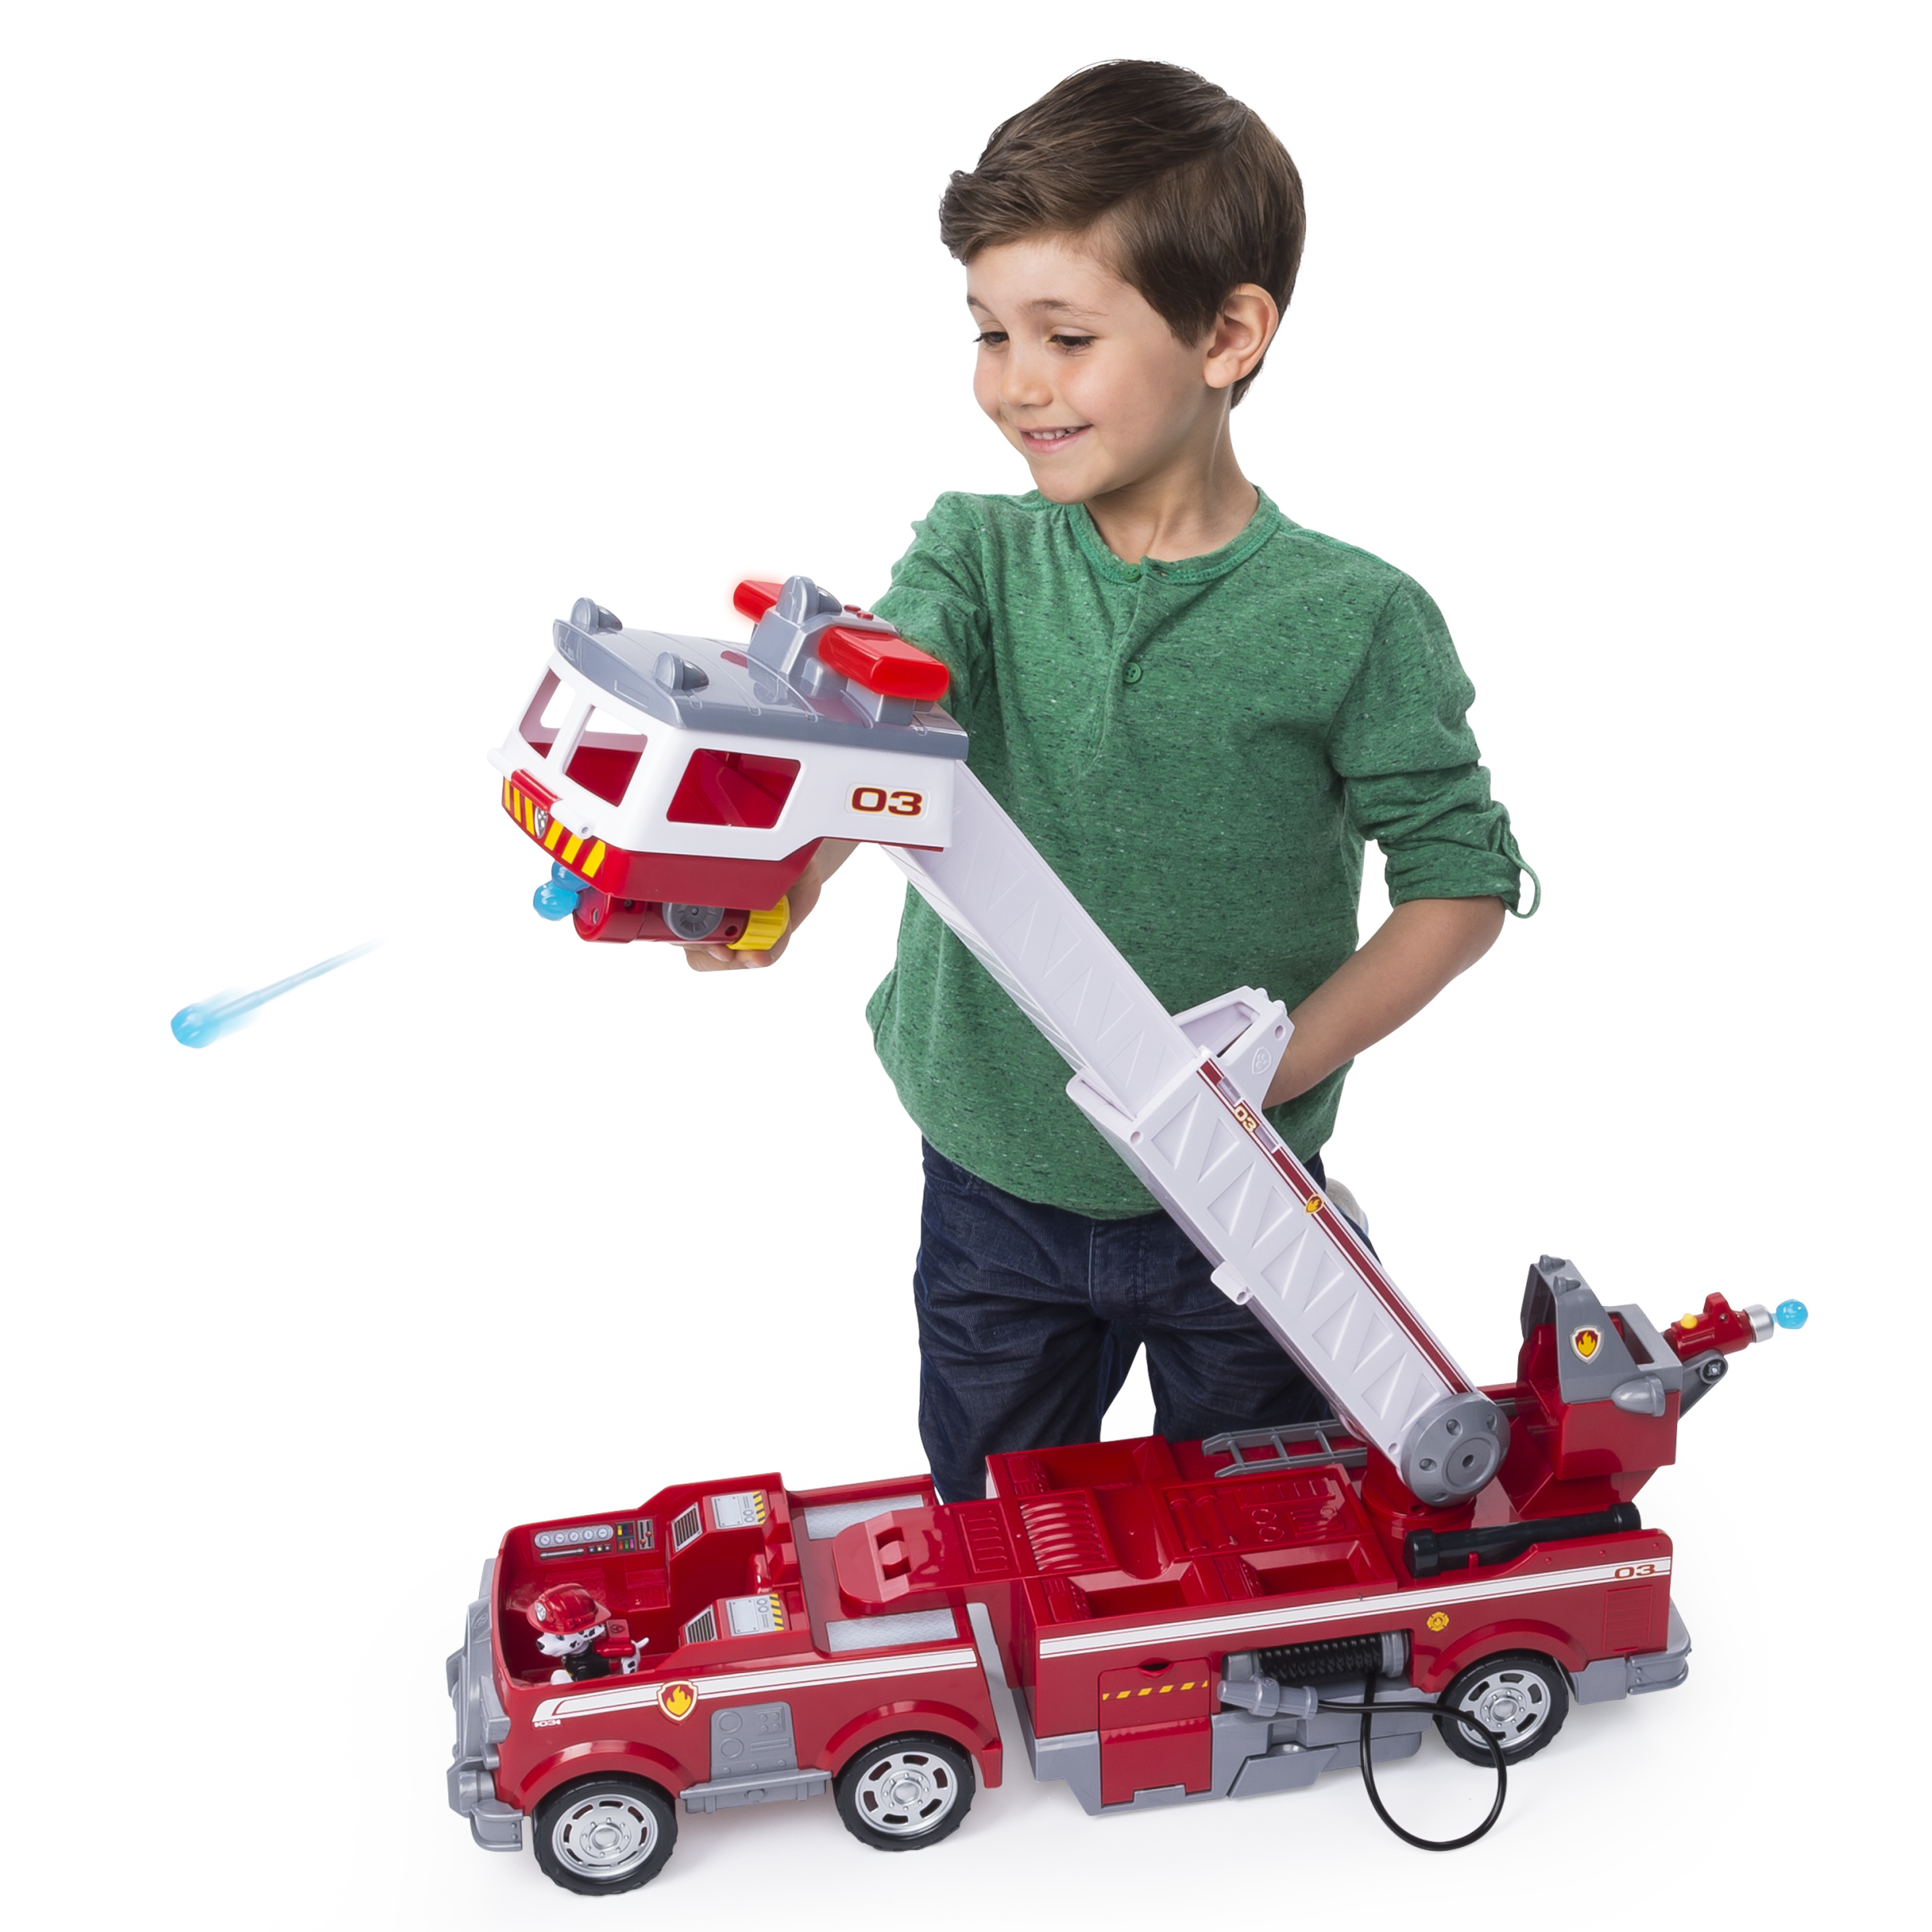 PAW Patrol Ultimate Rescue Fire Truck with Extendable 2 ft. Tall Ladder, for Ages 3 and Up - image 4 of 10